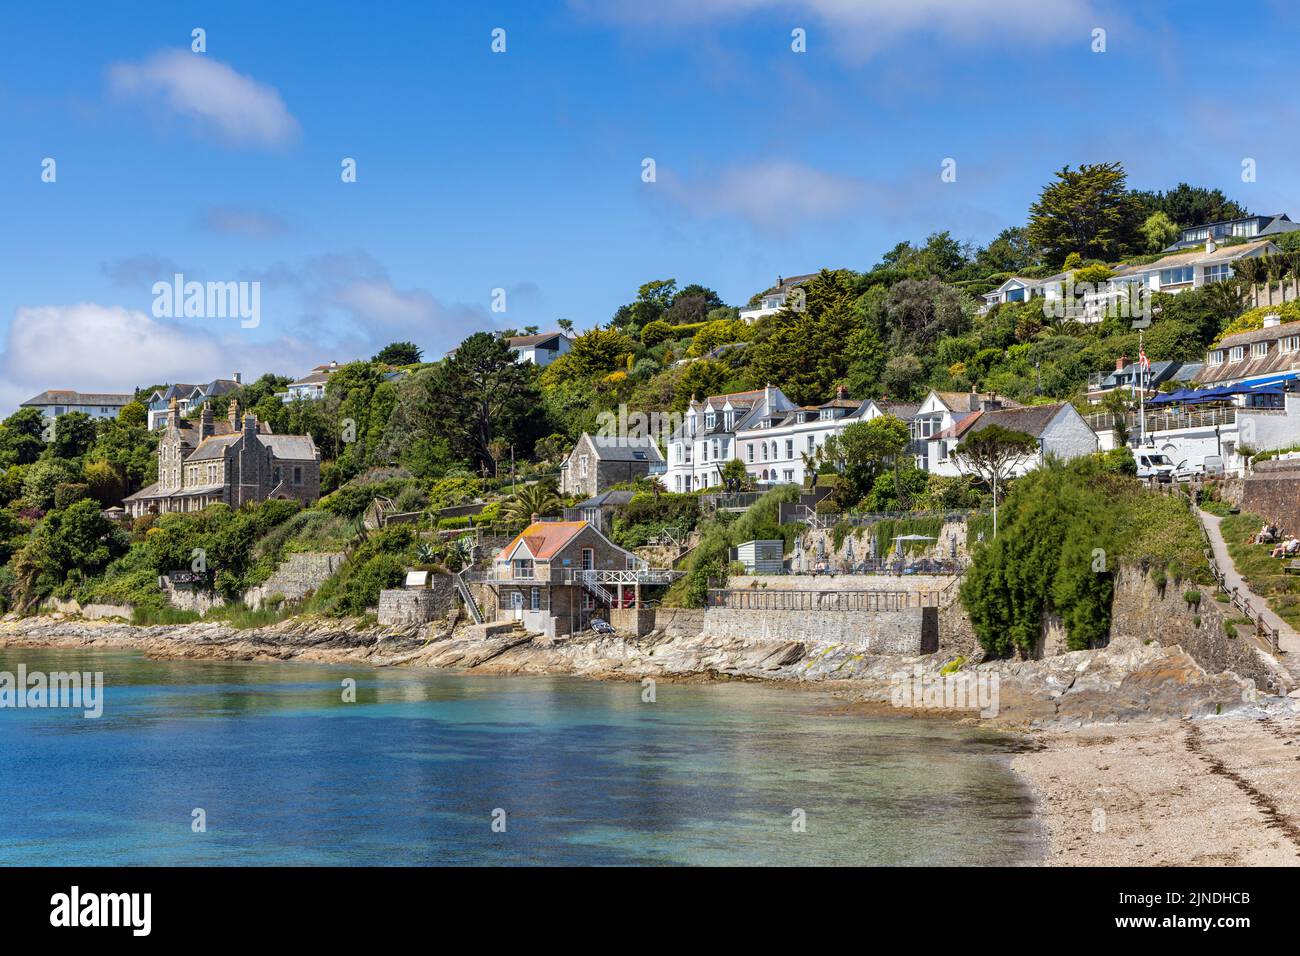 The picturesque village of St mawes on the end of the Roseland Peninsula in Cornwall, captured from Tavern beach. Stock Photo